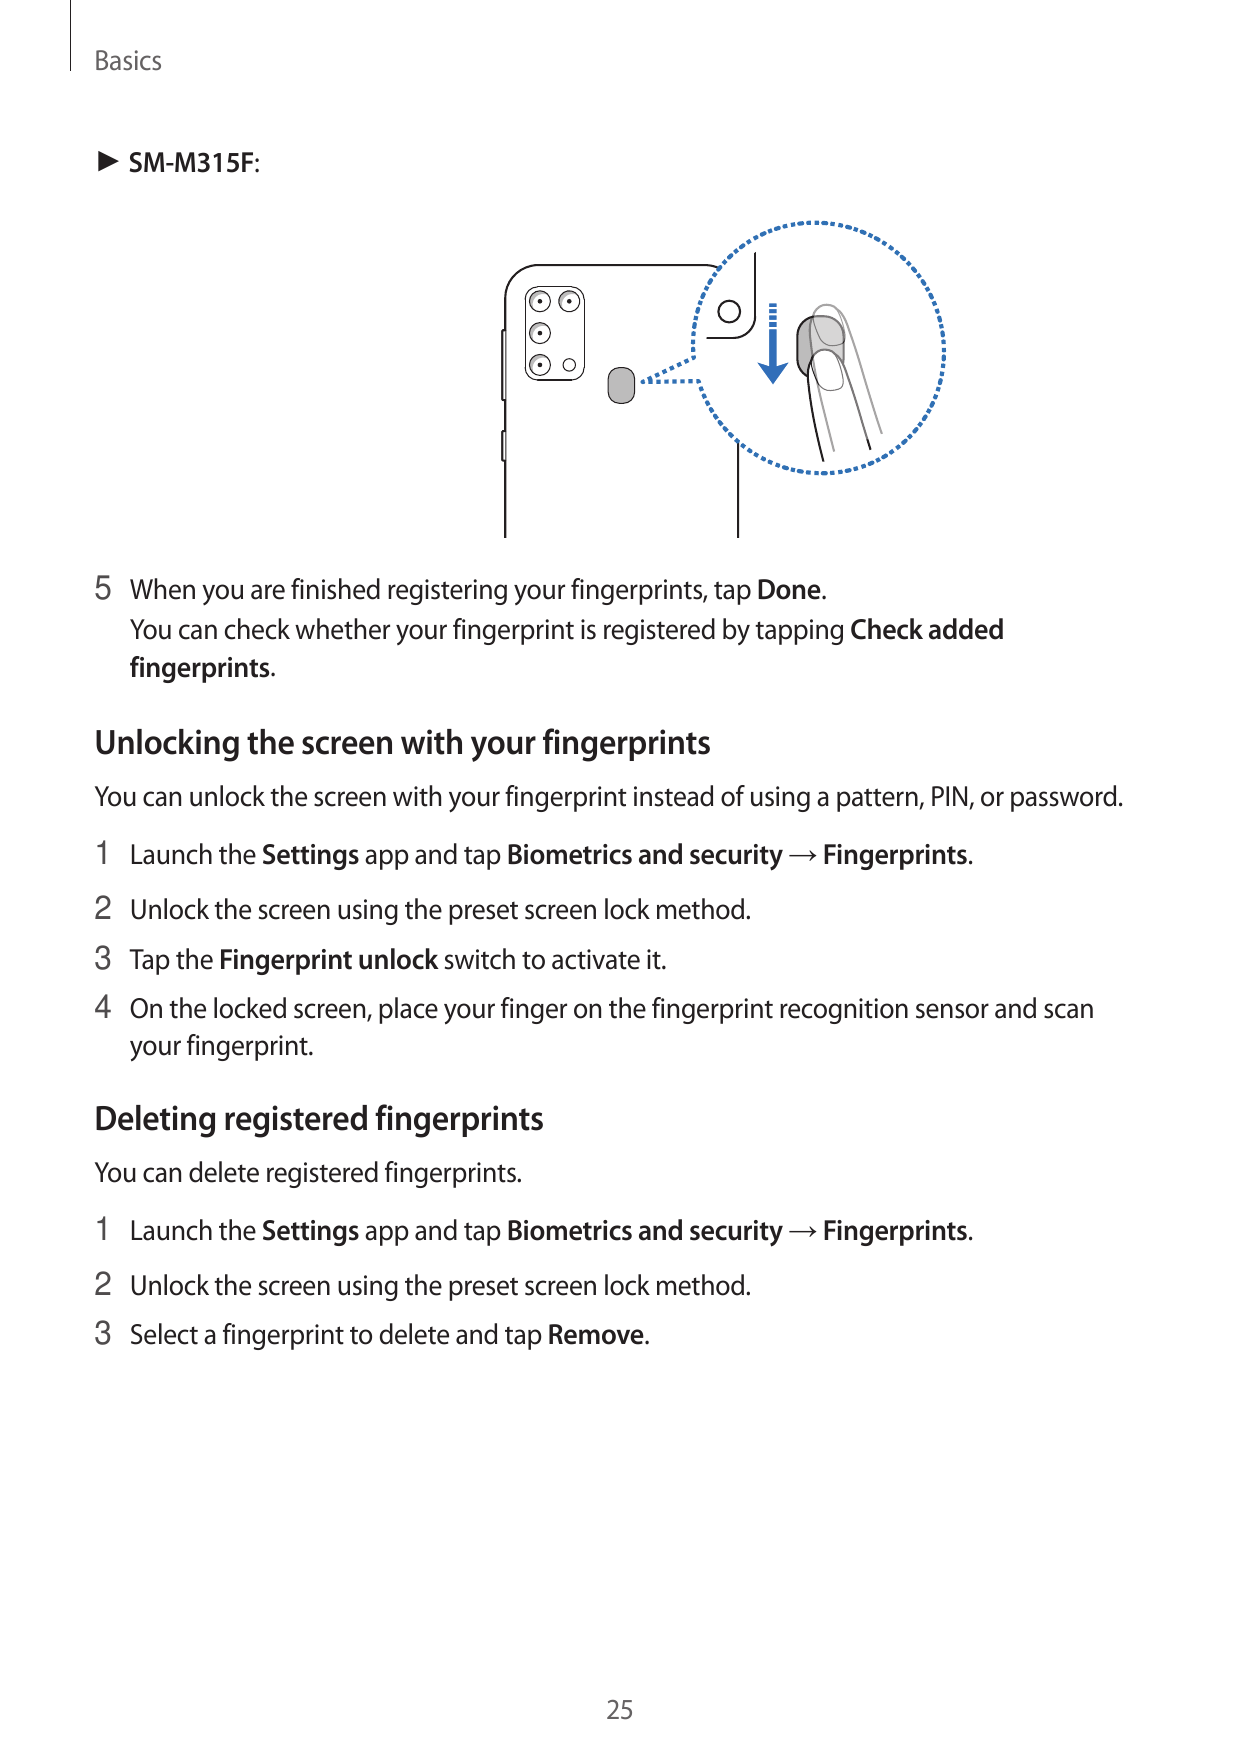 Basics► SM-M315F:5 When you are finished registering your fingerprints, tap Done.You can check whether your fingerprint is regis